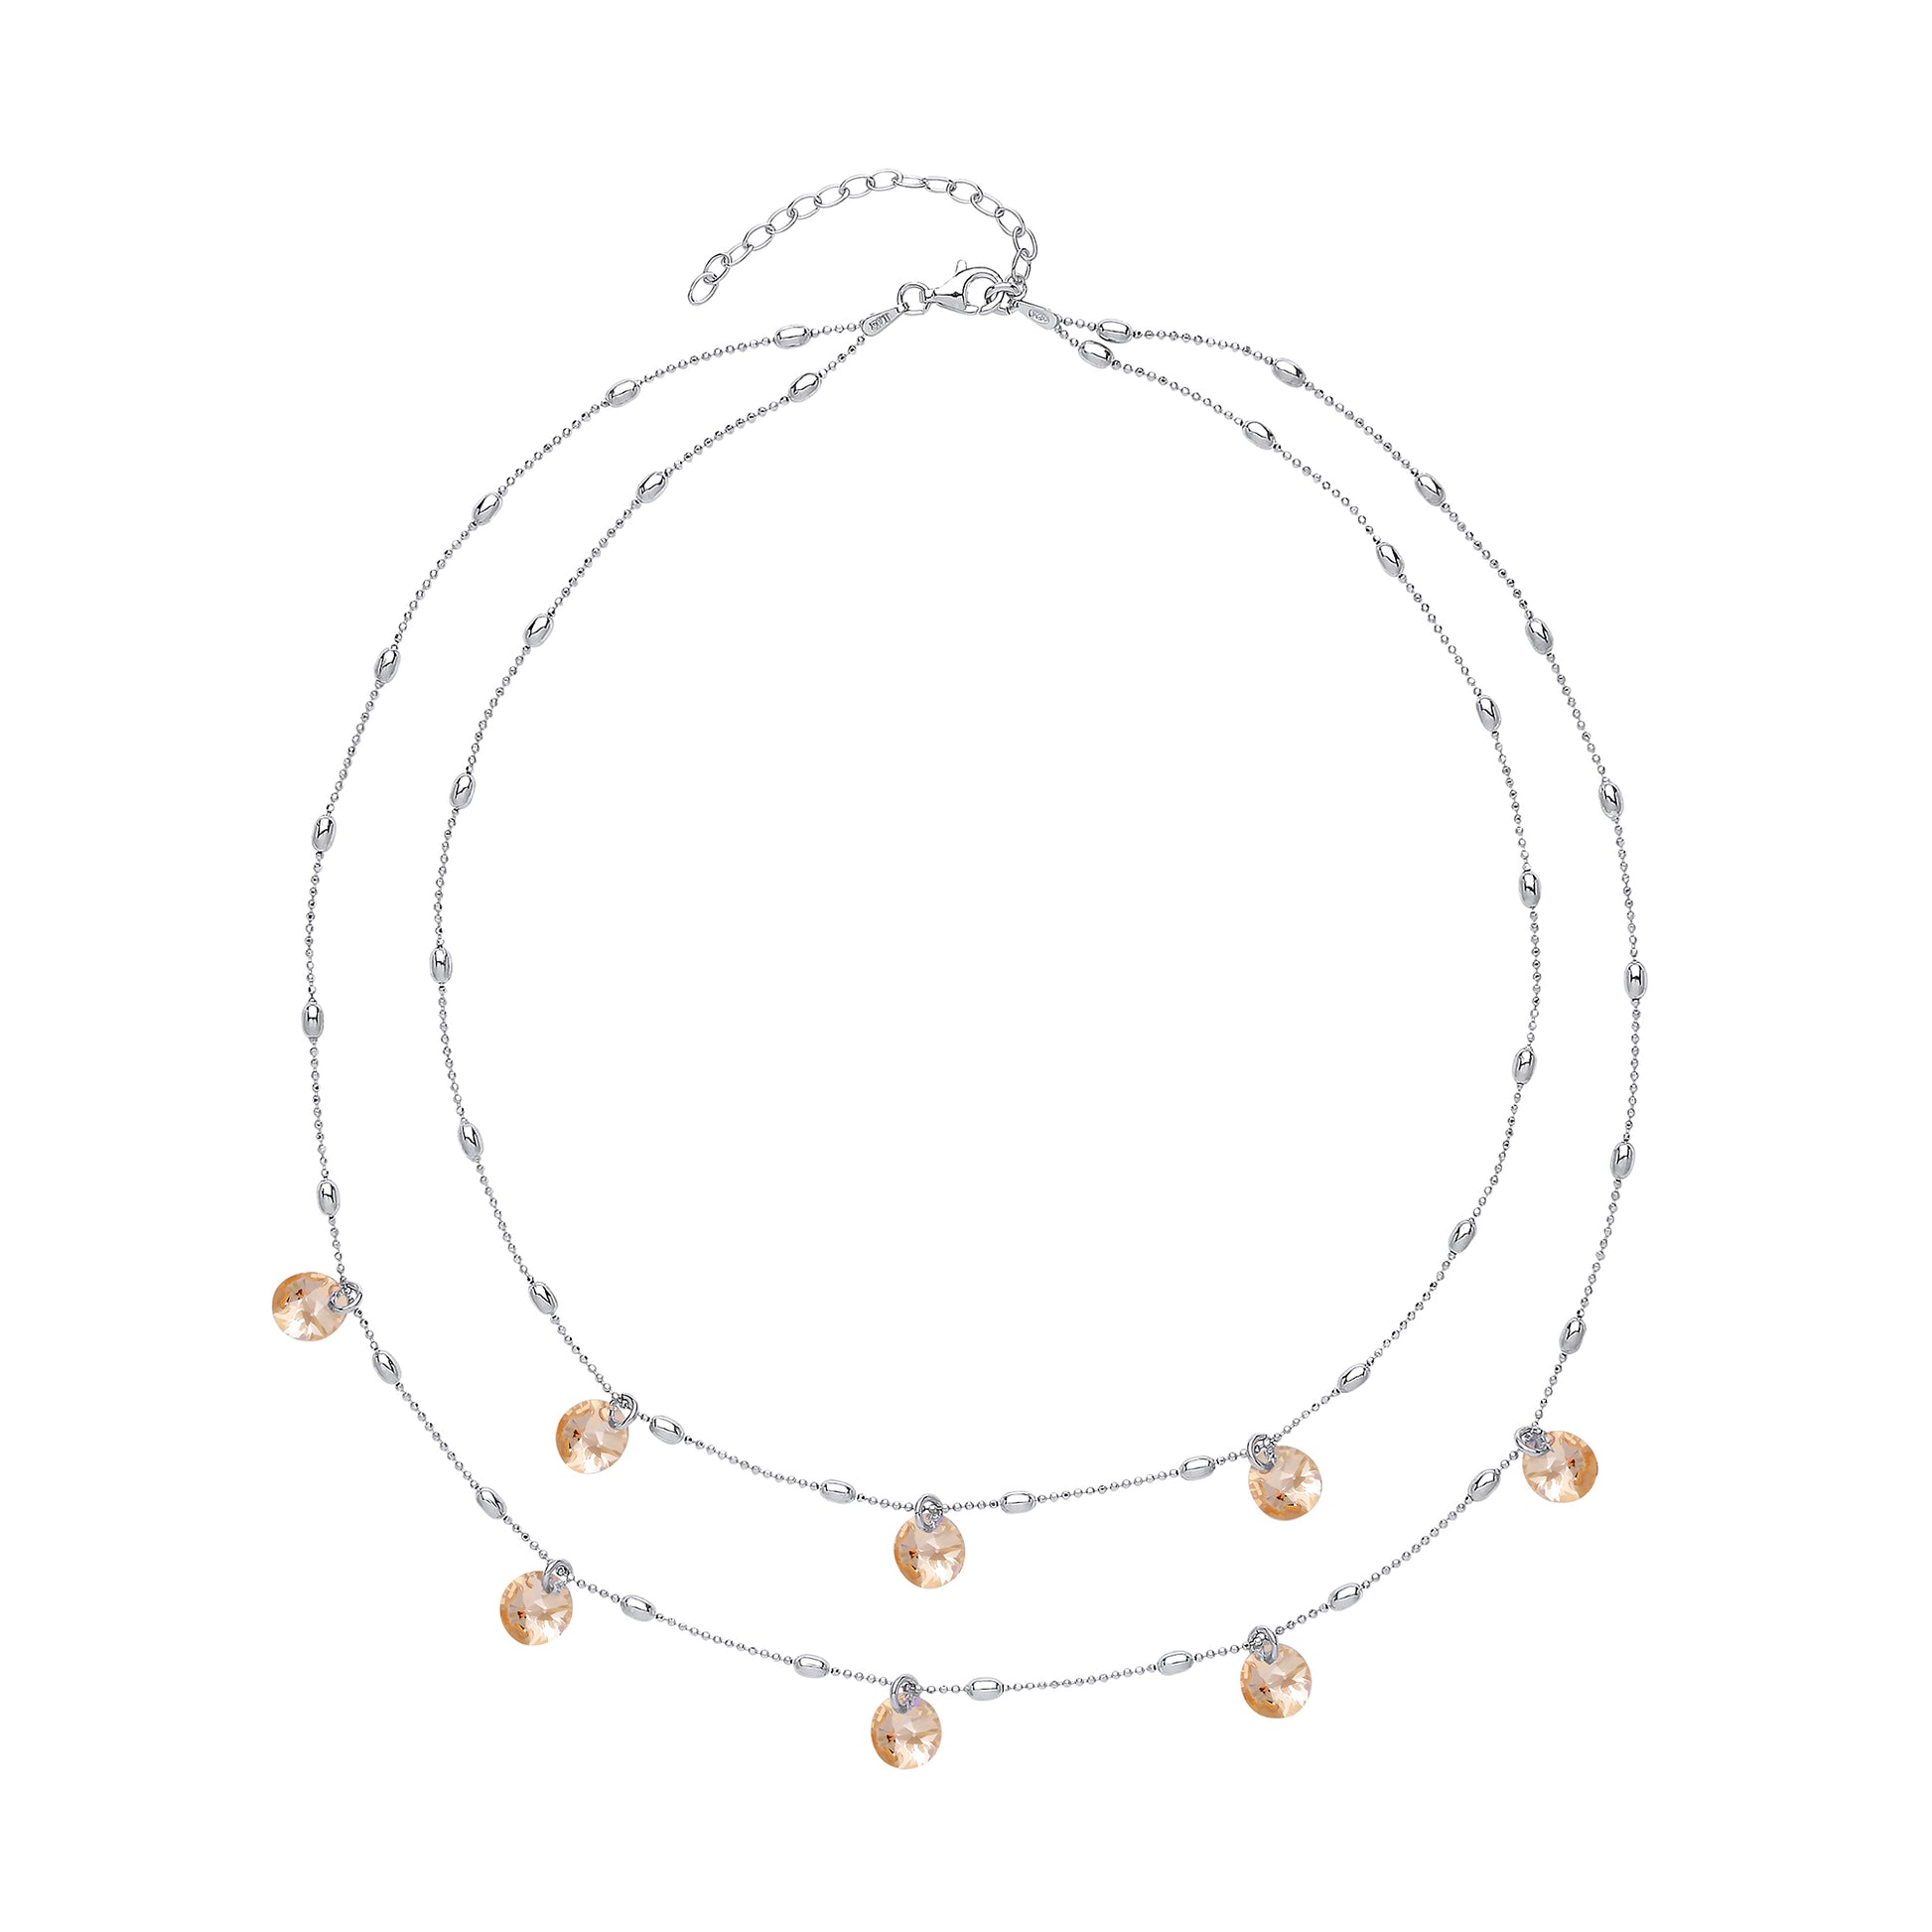 Silver  Peach Crystal String Lights Bead Necklace 15 + 2 inch - GVK188GOLD